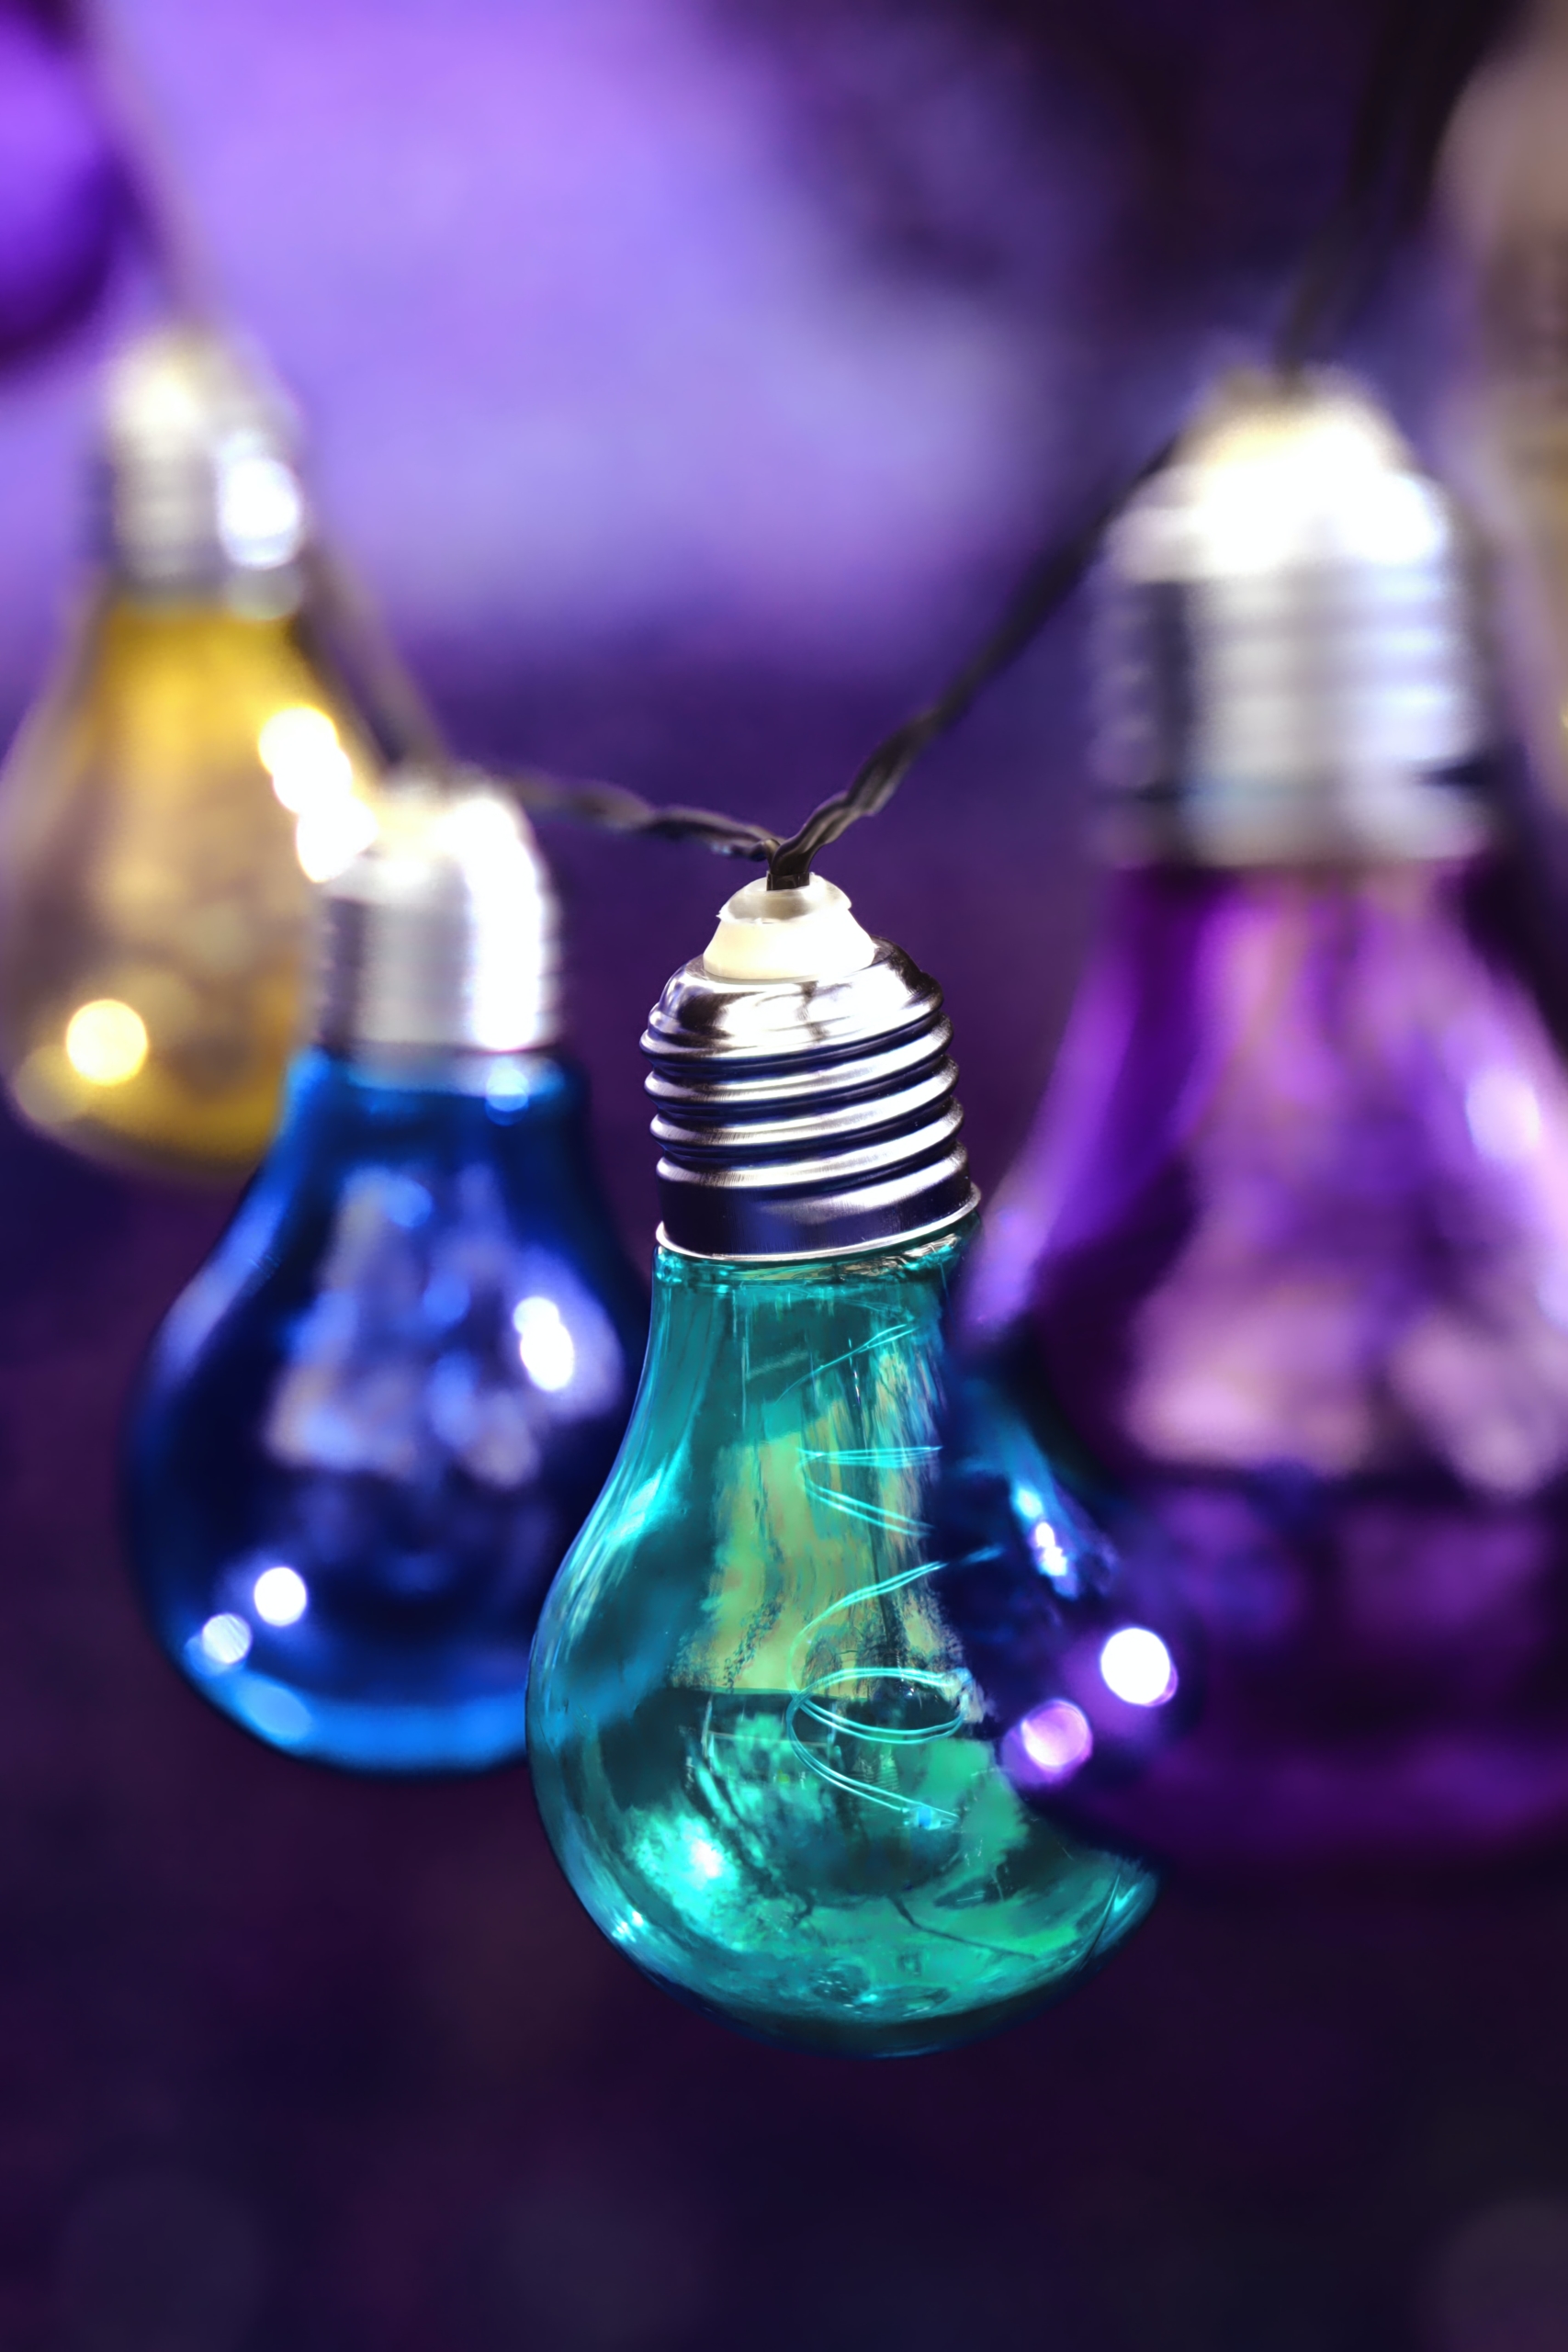 Coloured, hanging light bulbs with purple background